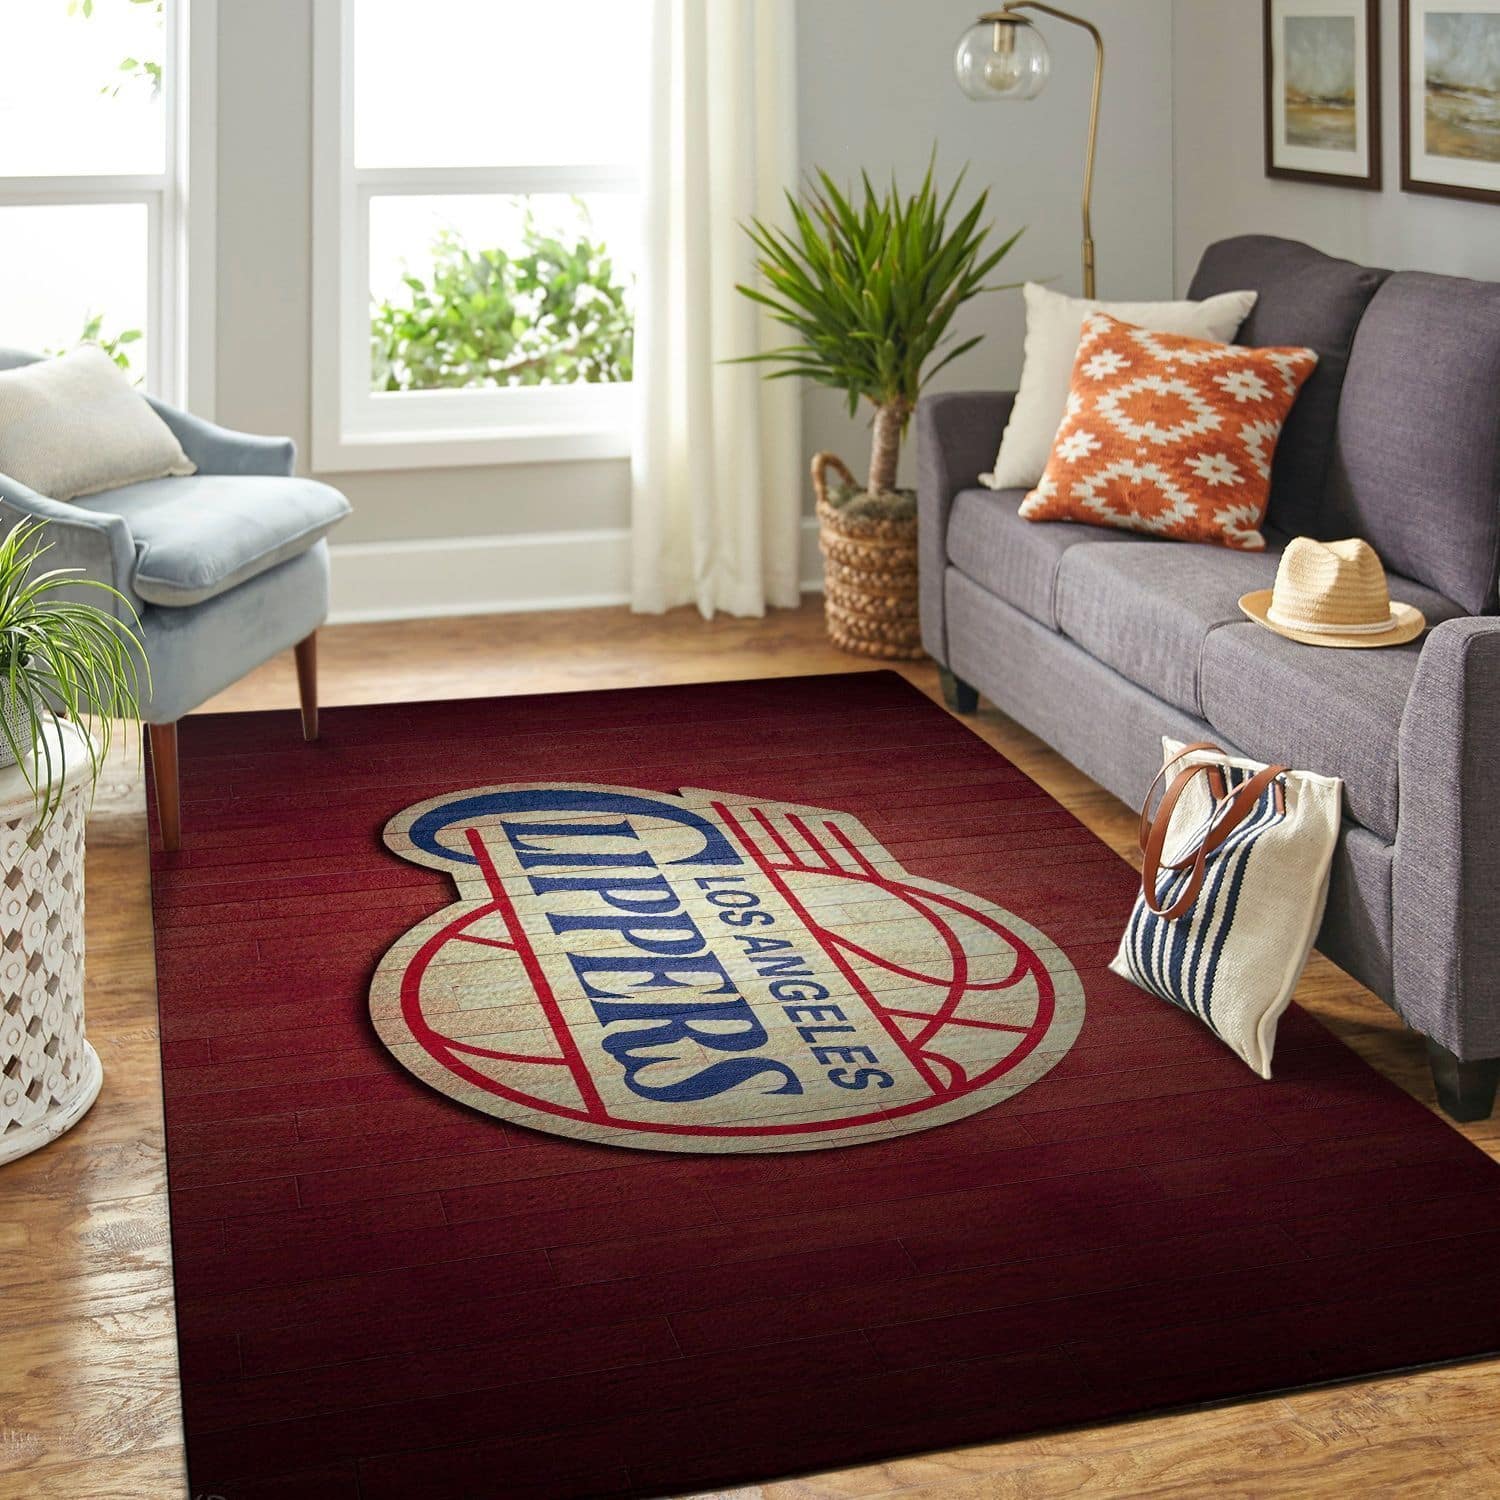 Amazon Los Angeles Clippers Living Room Area No3554 Rug